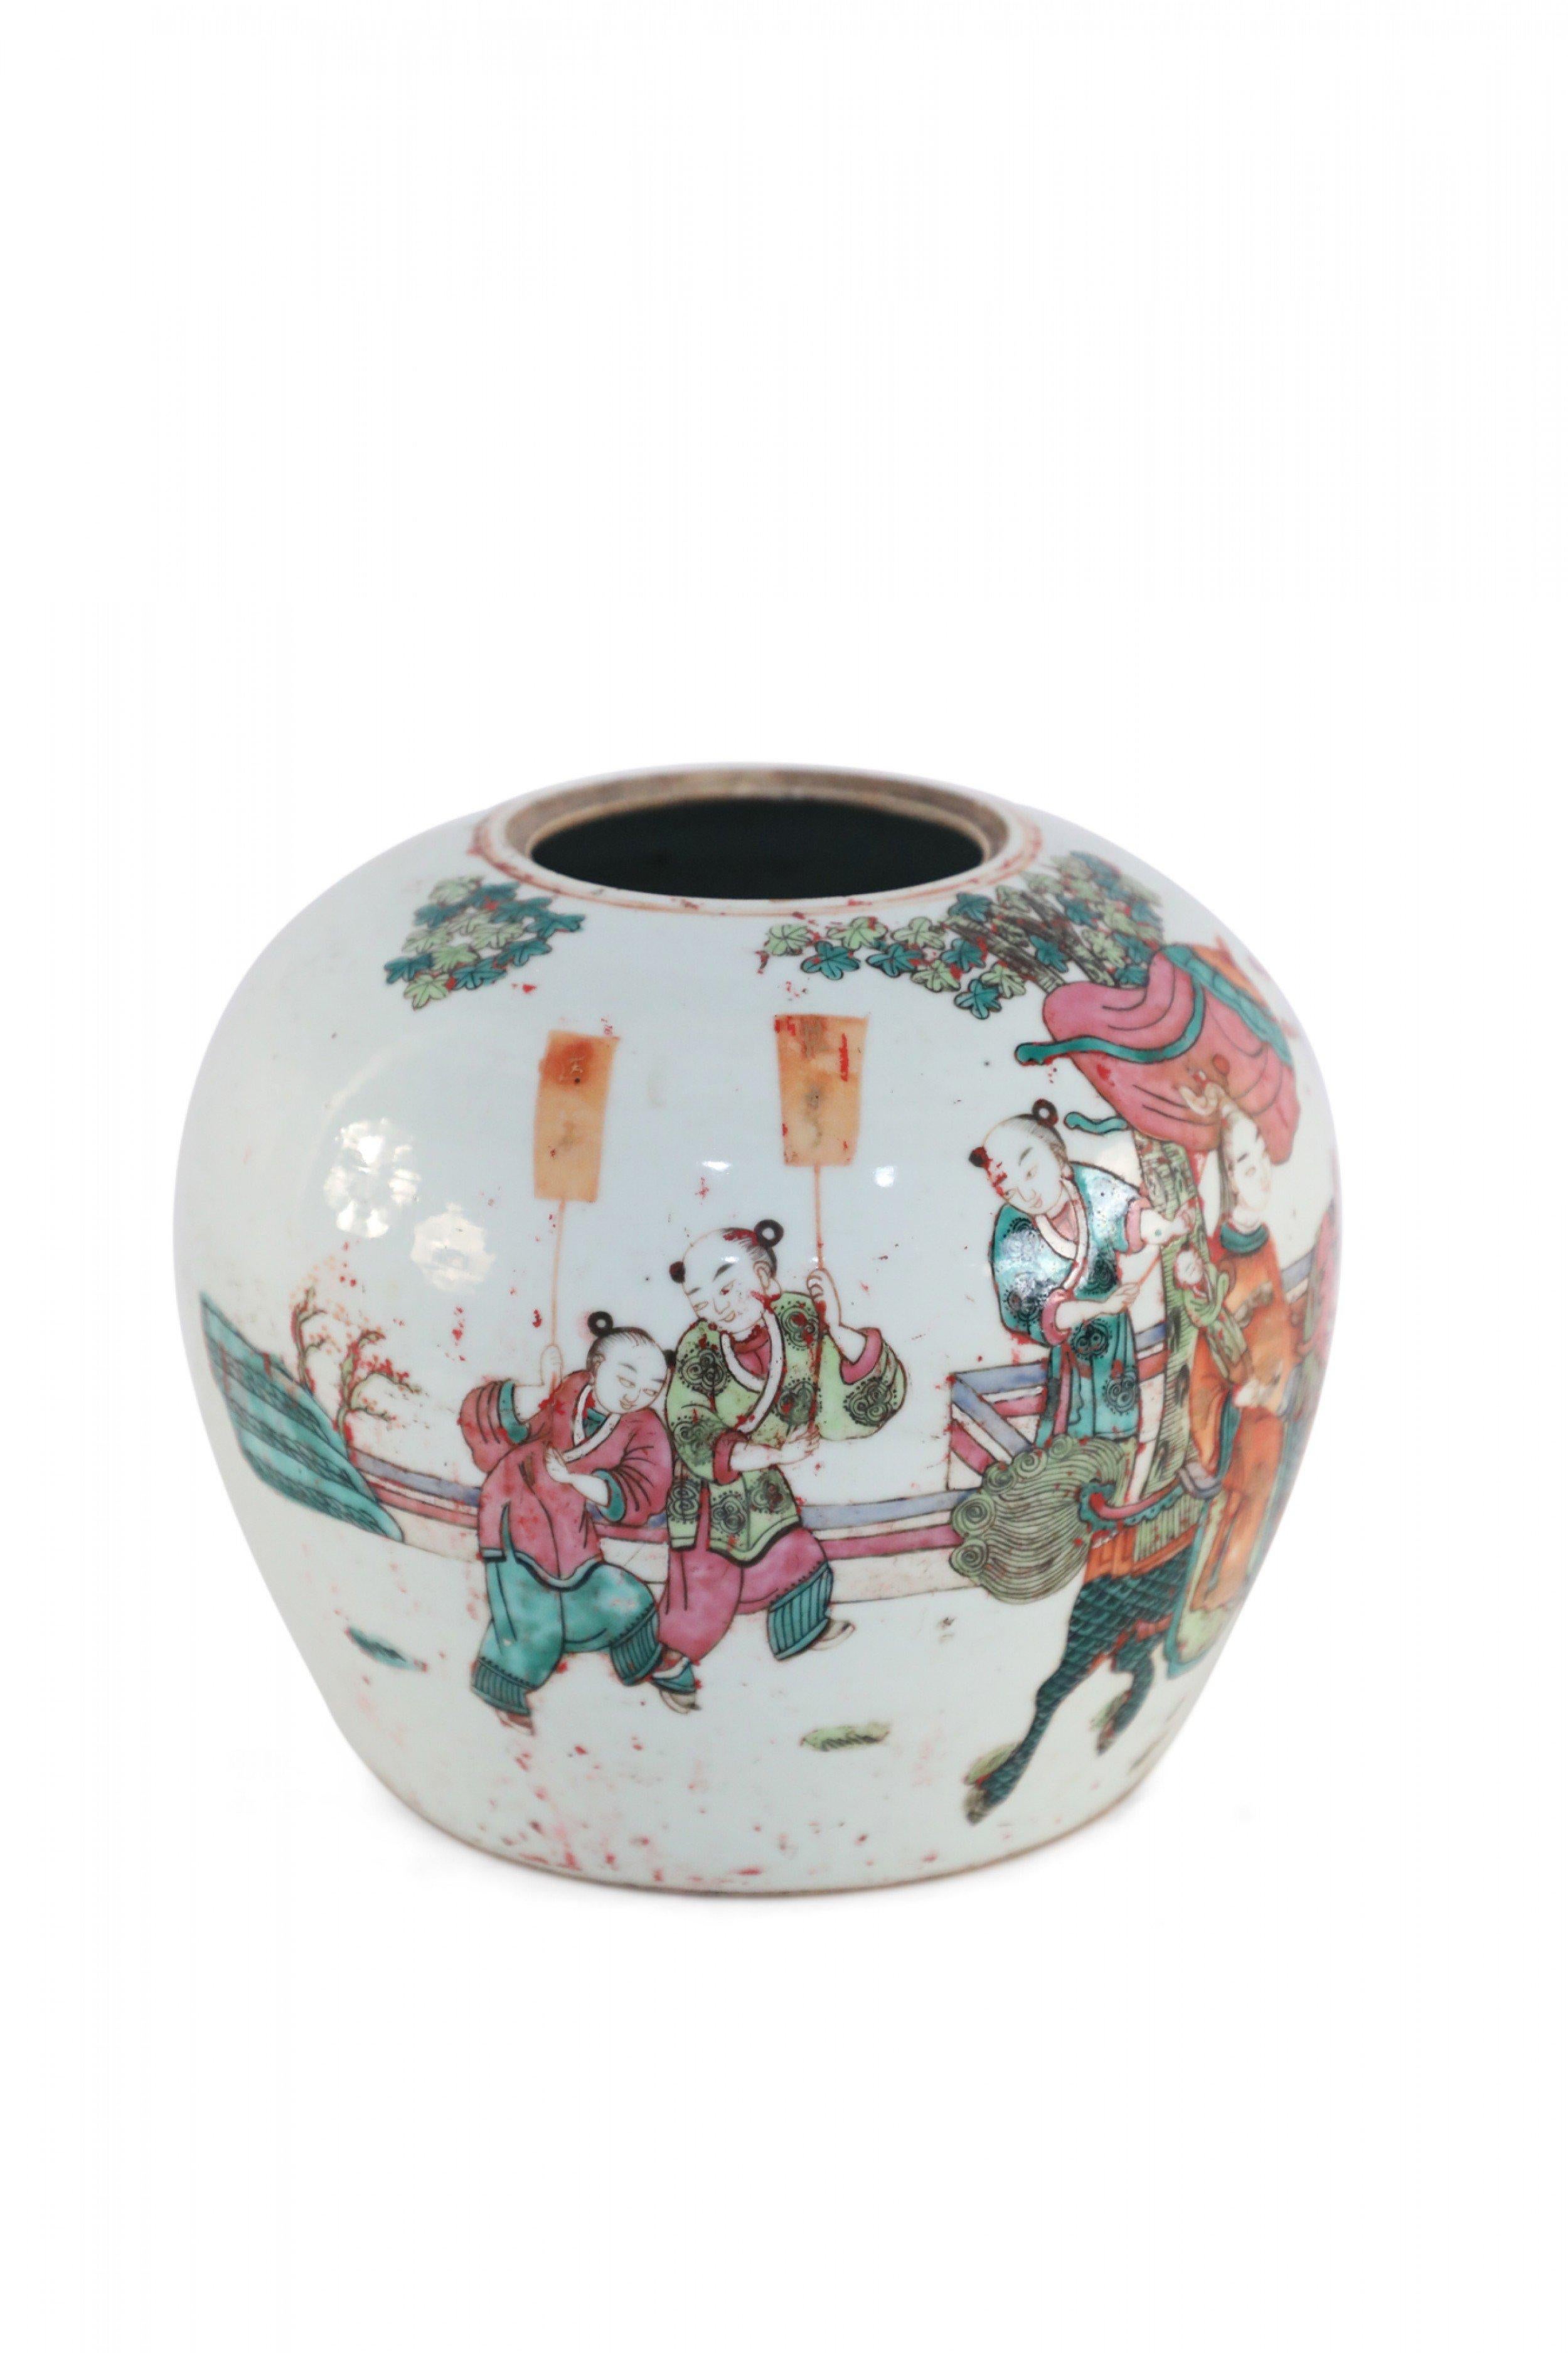 Antique Chinese (Early 20th Century) low, rounded white porcelain vase, known as a watermelon jar, depicting a spirited procession of participants holding flags and playing drums leading a woman riding a dragon, in colorful shades of magenta, orange